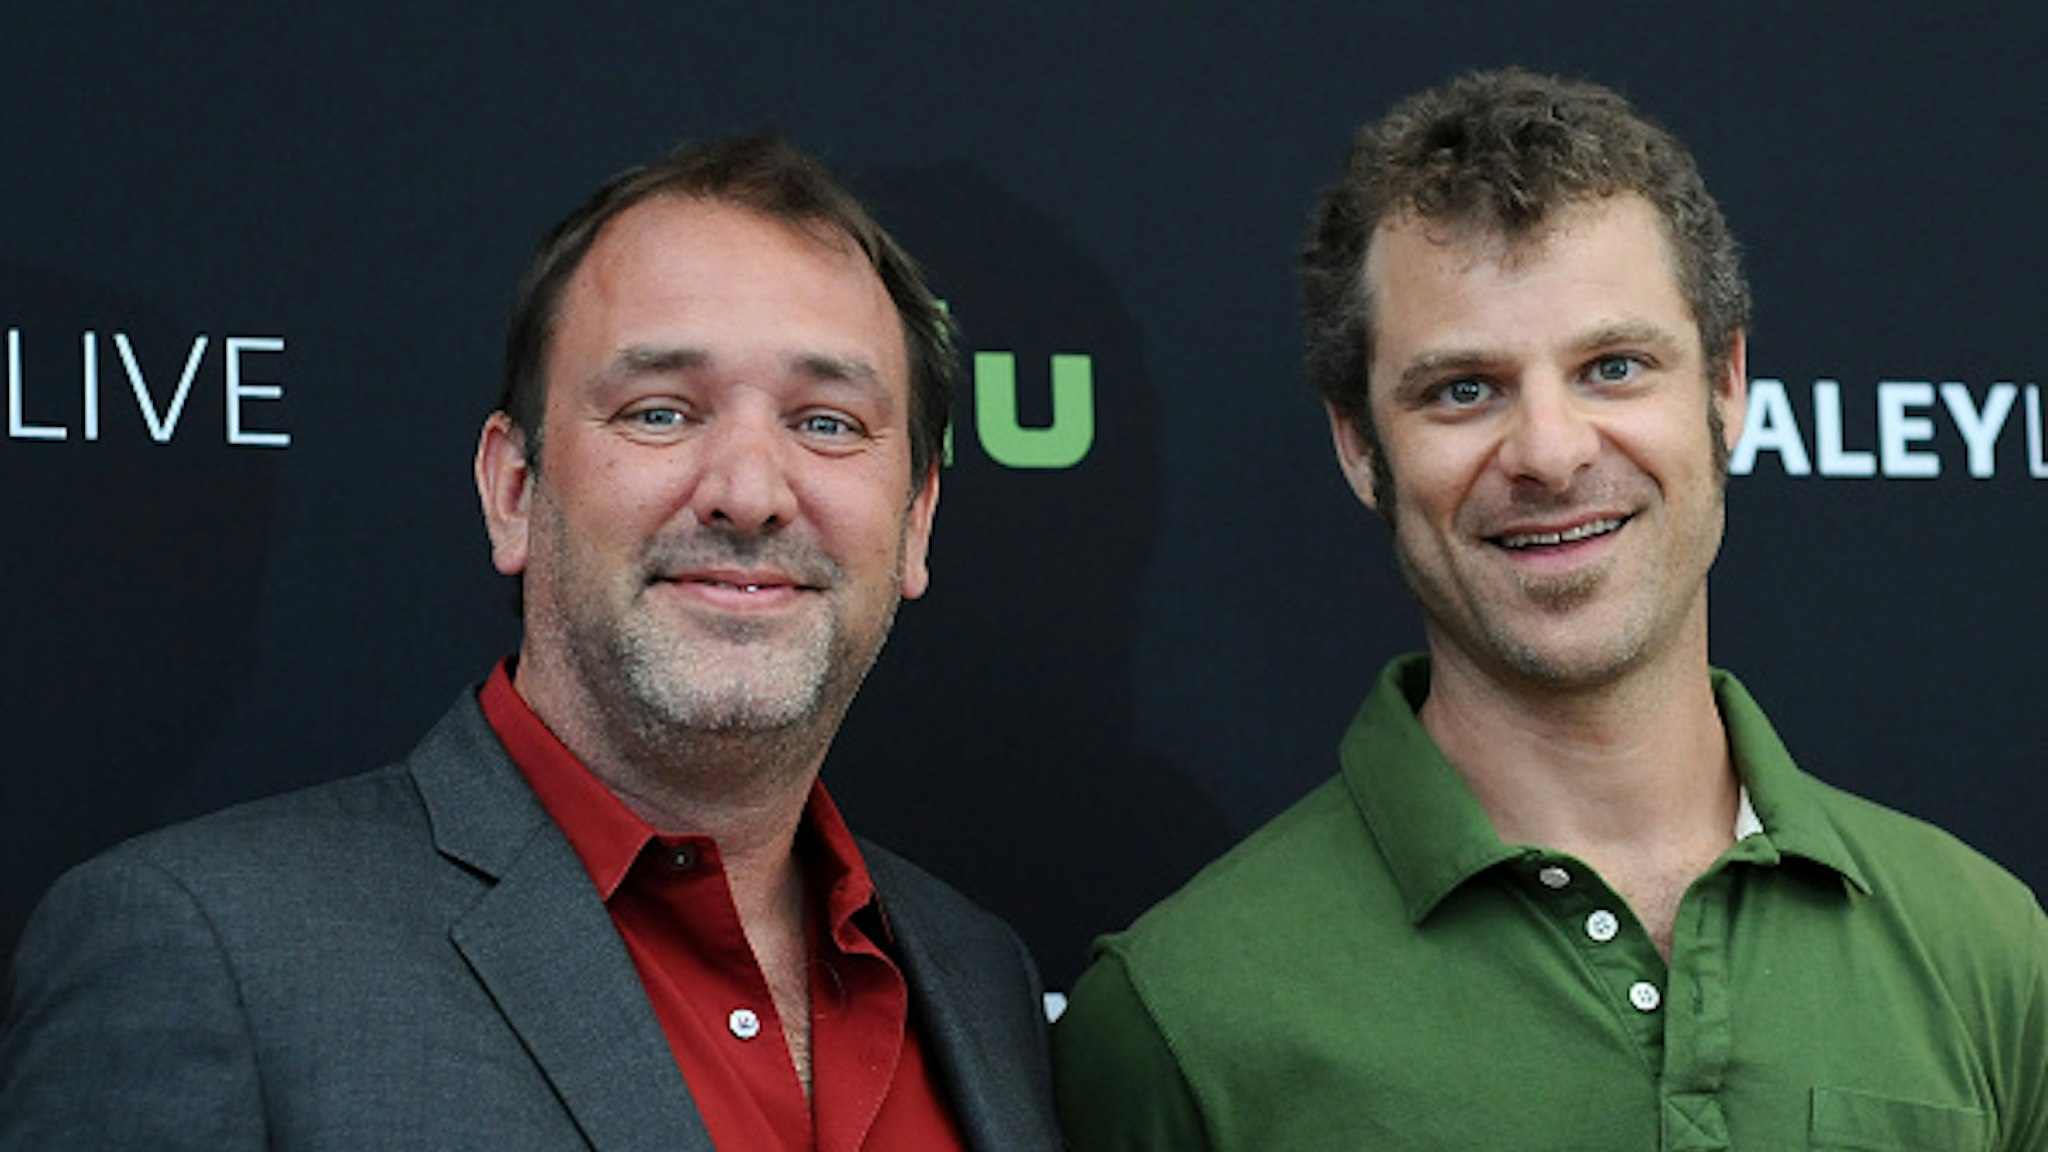 BEVERLY HILLS, CA - SEPTEMBER 01: Trey Parker and Matt Stone attend the The Paley Center for Media presents a special retrospective event honoring 20 seasons of "South Park" at The Paley Center for Media on September 1, 2016 in Beverly Hills, California.